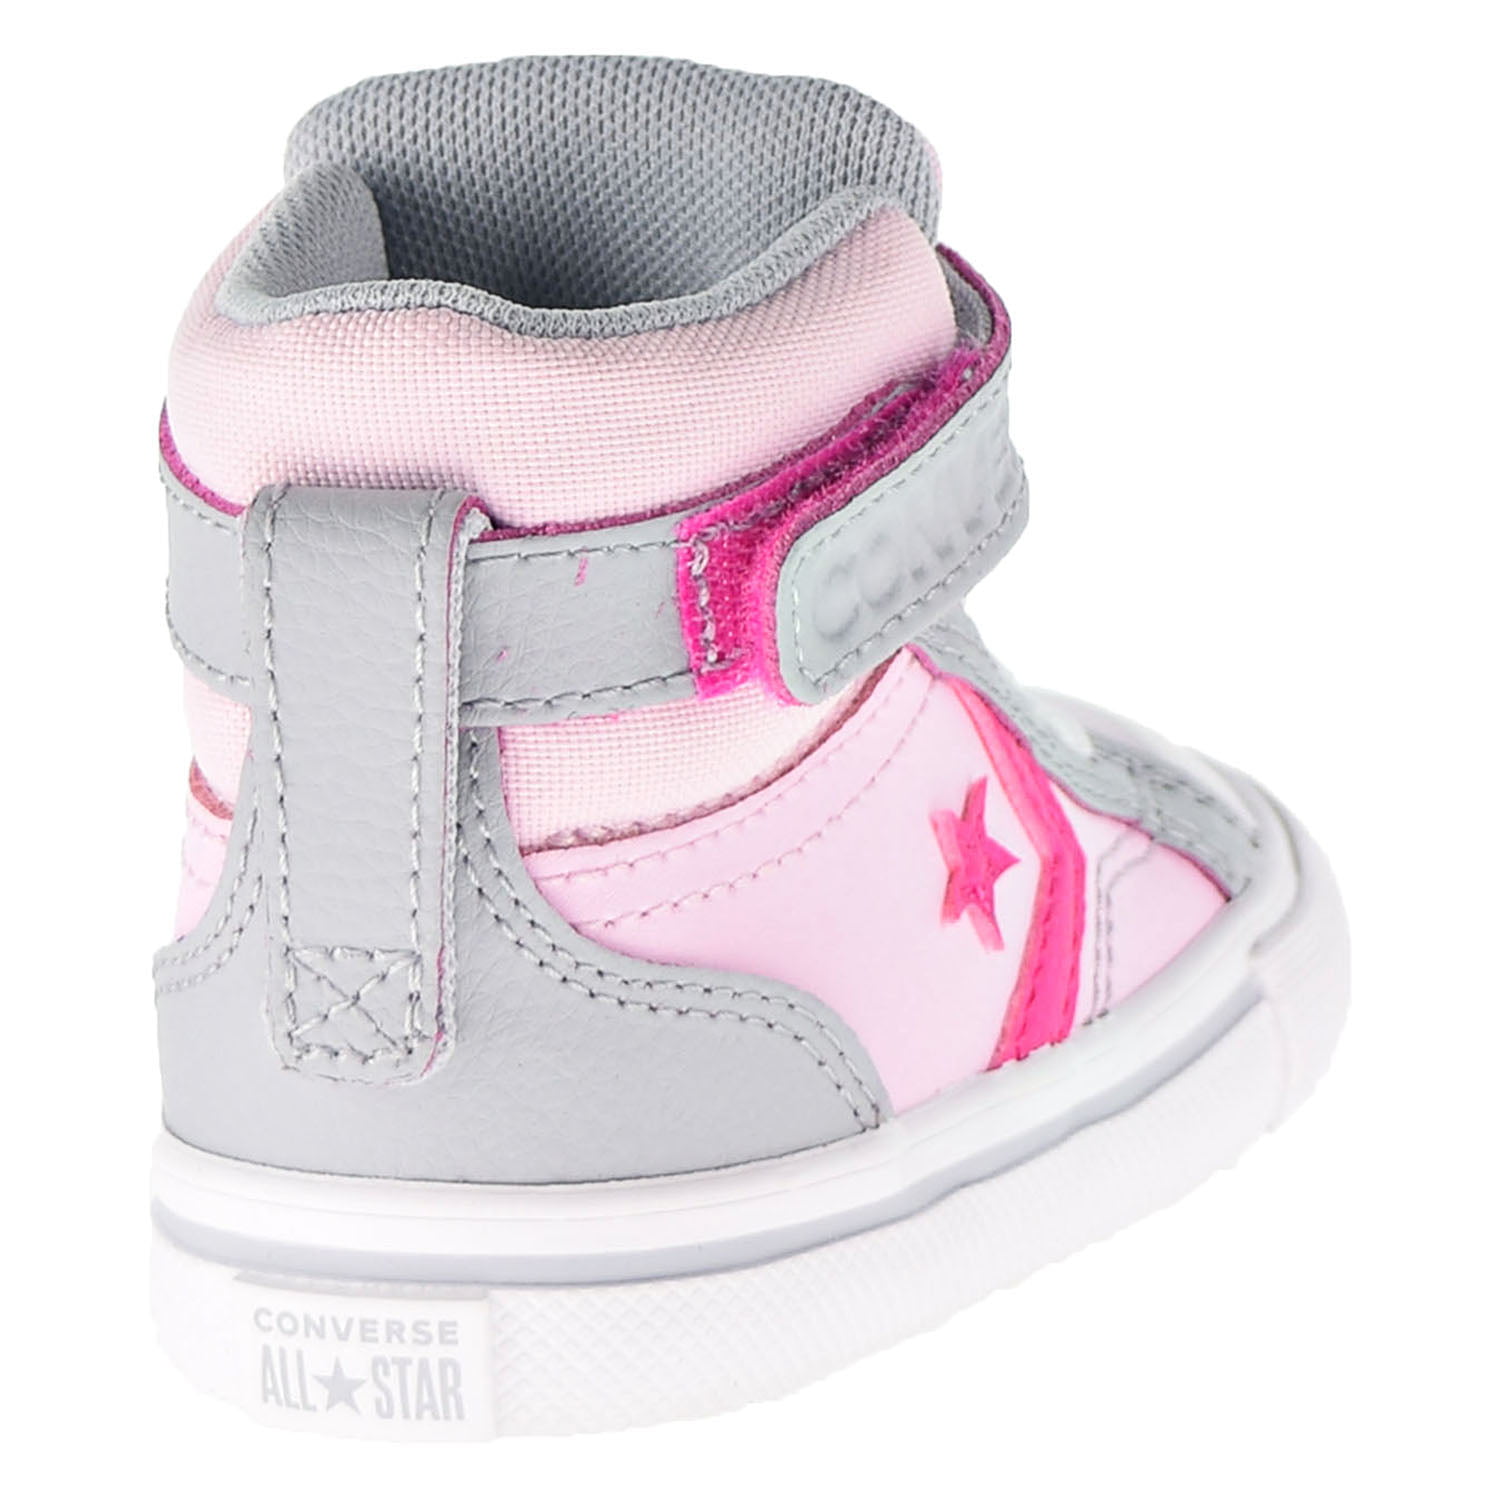 M Strap Two-Tone Converse Hi Shoes Pink Toddler Blaze Leather Pro US) (2 Foam-Wolf 766052c Grey